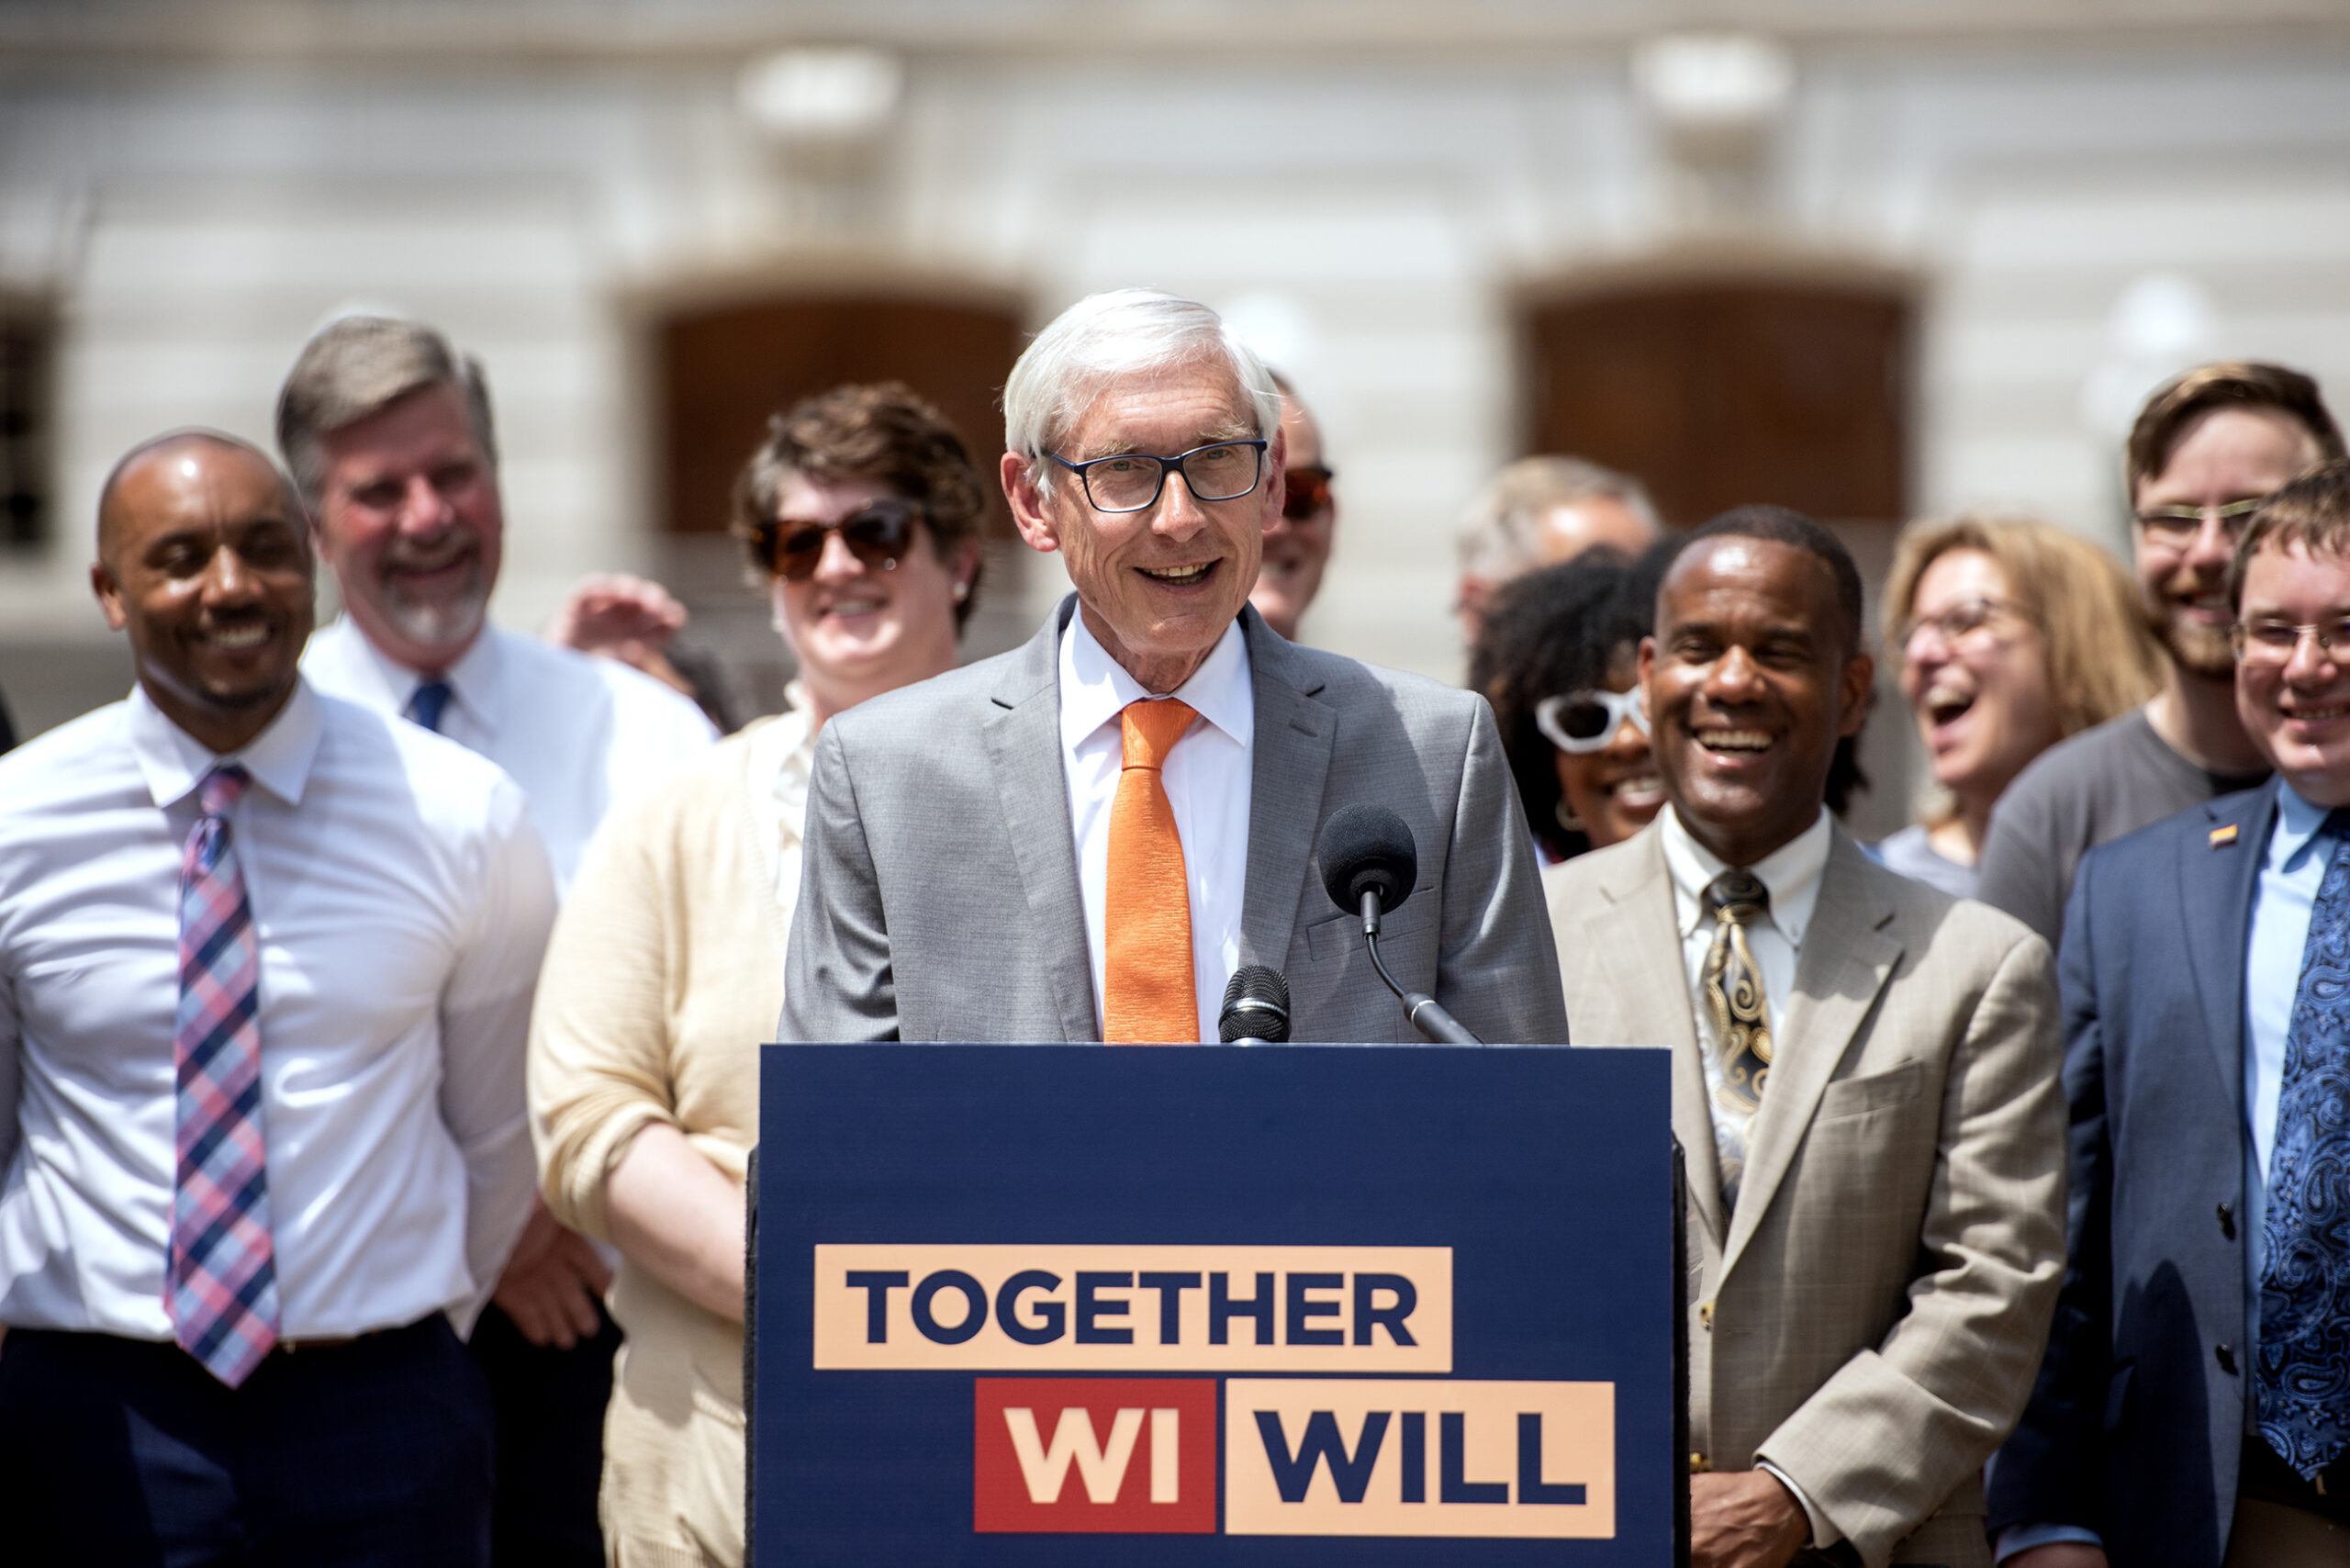 Gov. Tony Evers smiles as he speaks at a podium outside the Capitol building.